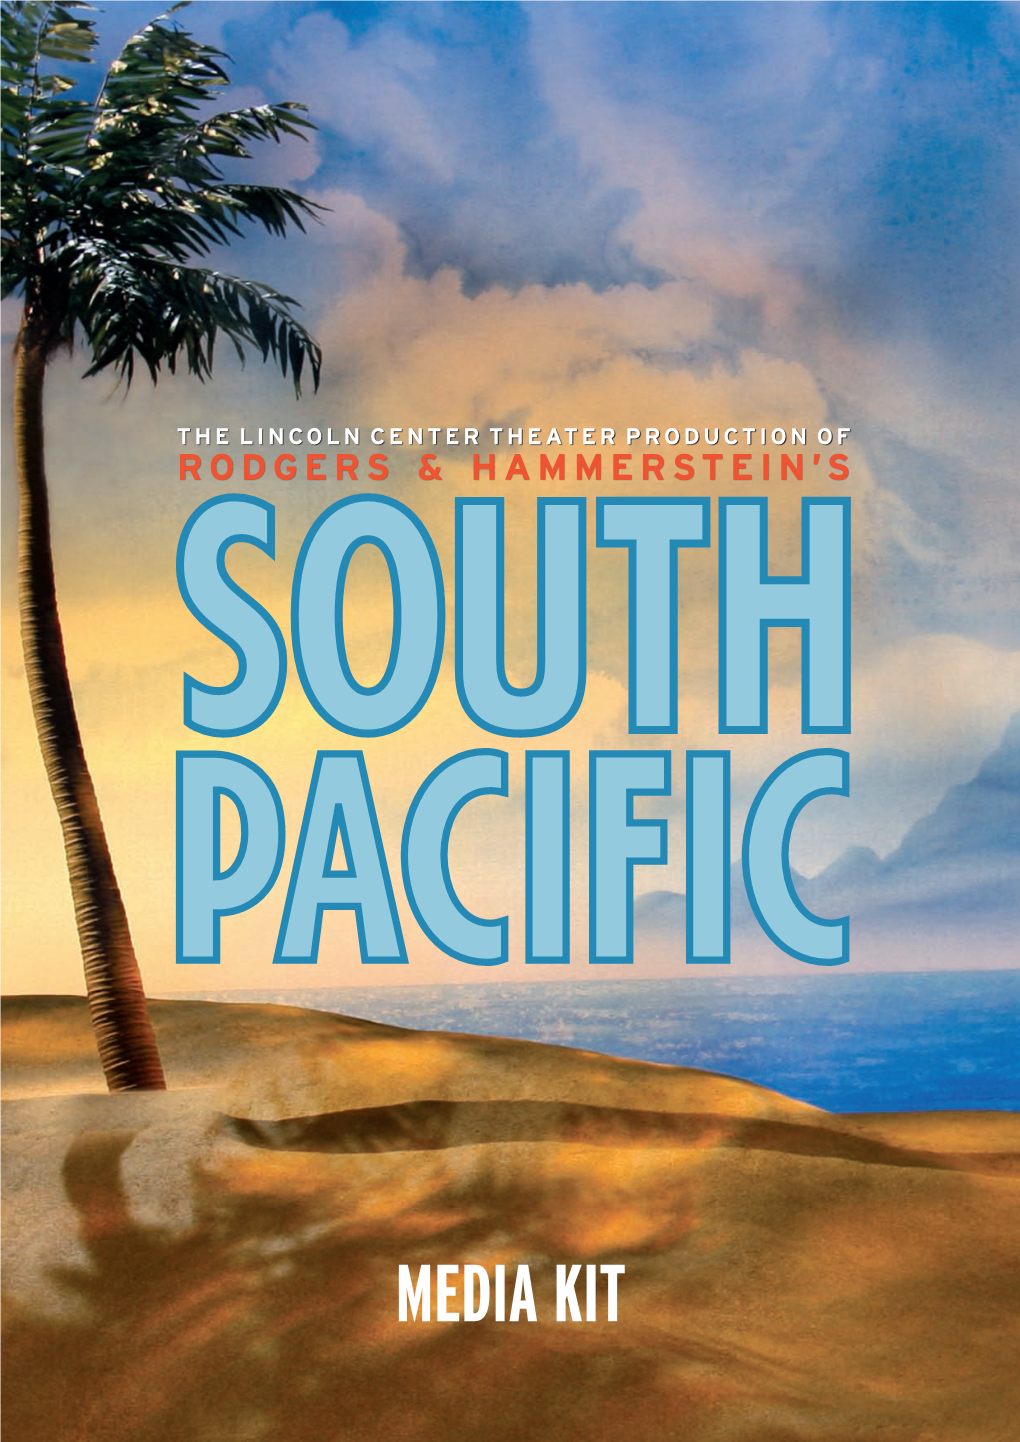 SOUTH PACIFIC” Heads North for Brisbane Season the TIMELESS Musical SOUTH PACIFIC to Feature a Stellar Australian Line-Up